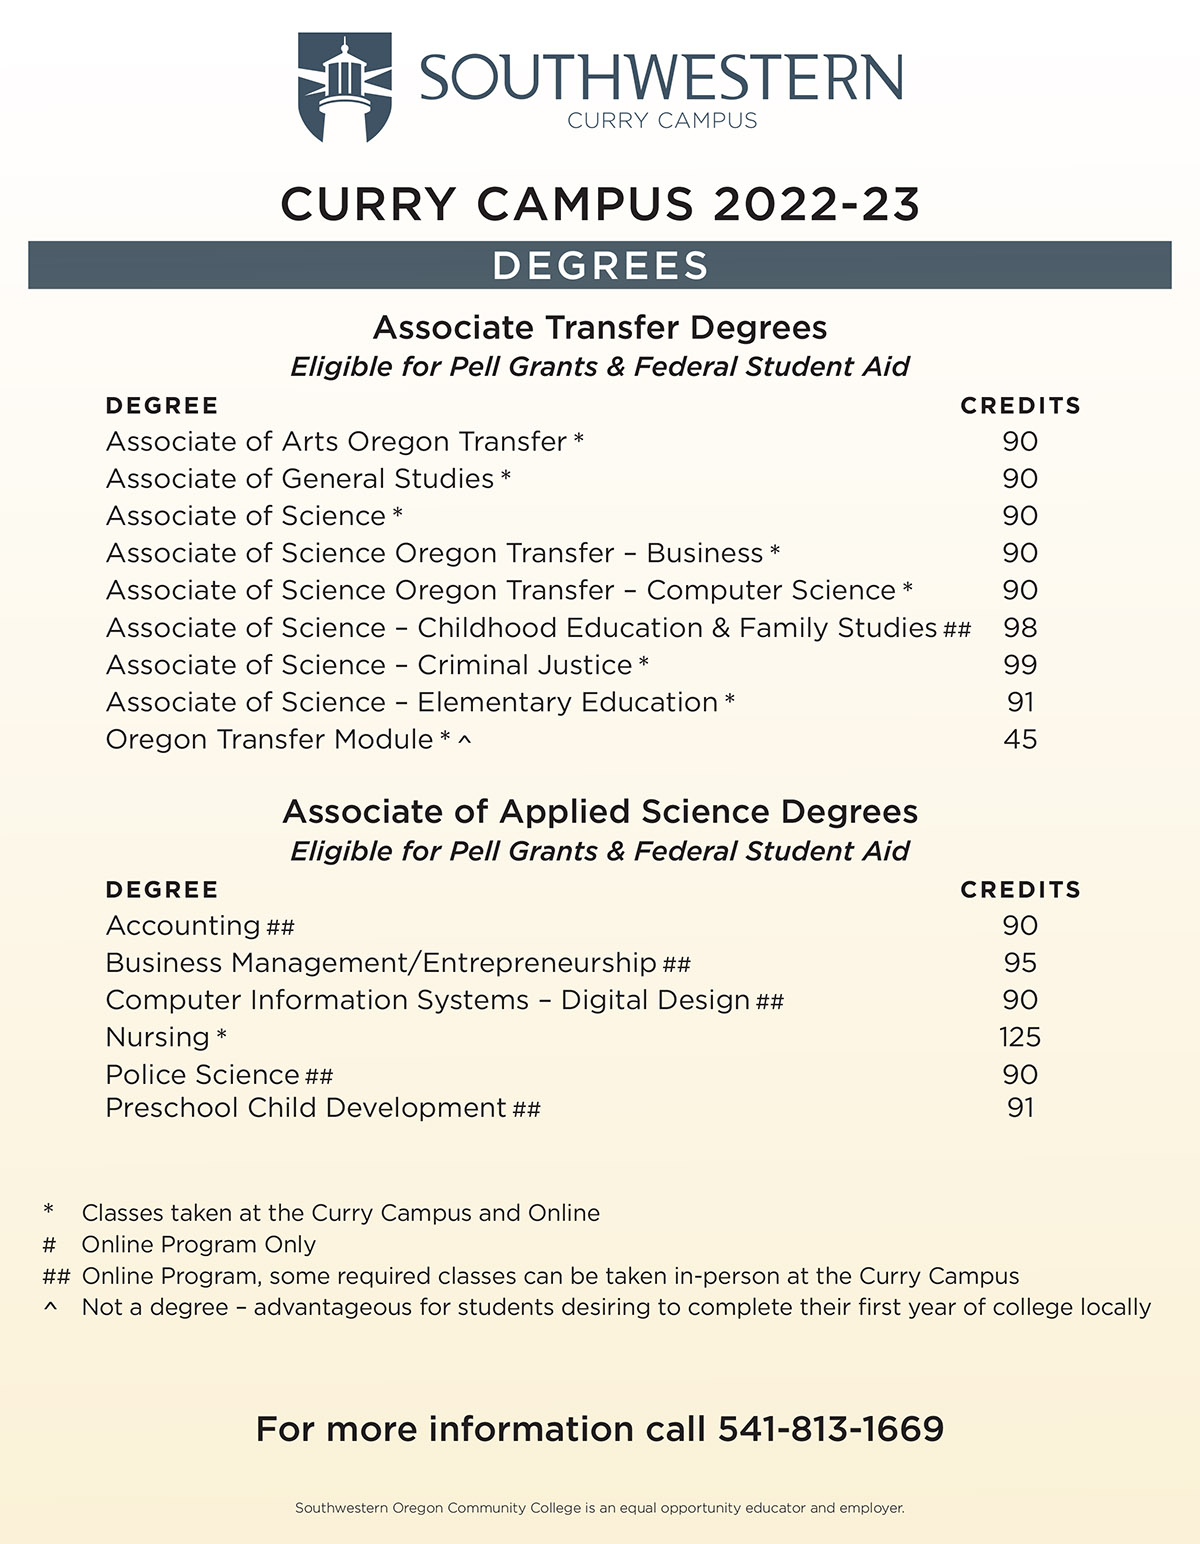 Curry Campus Degrees